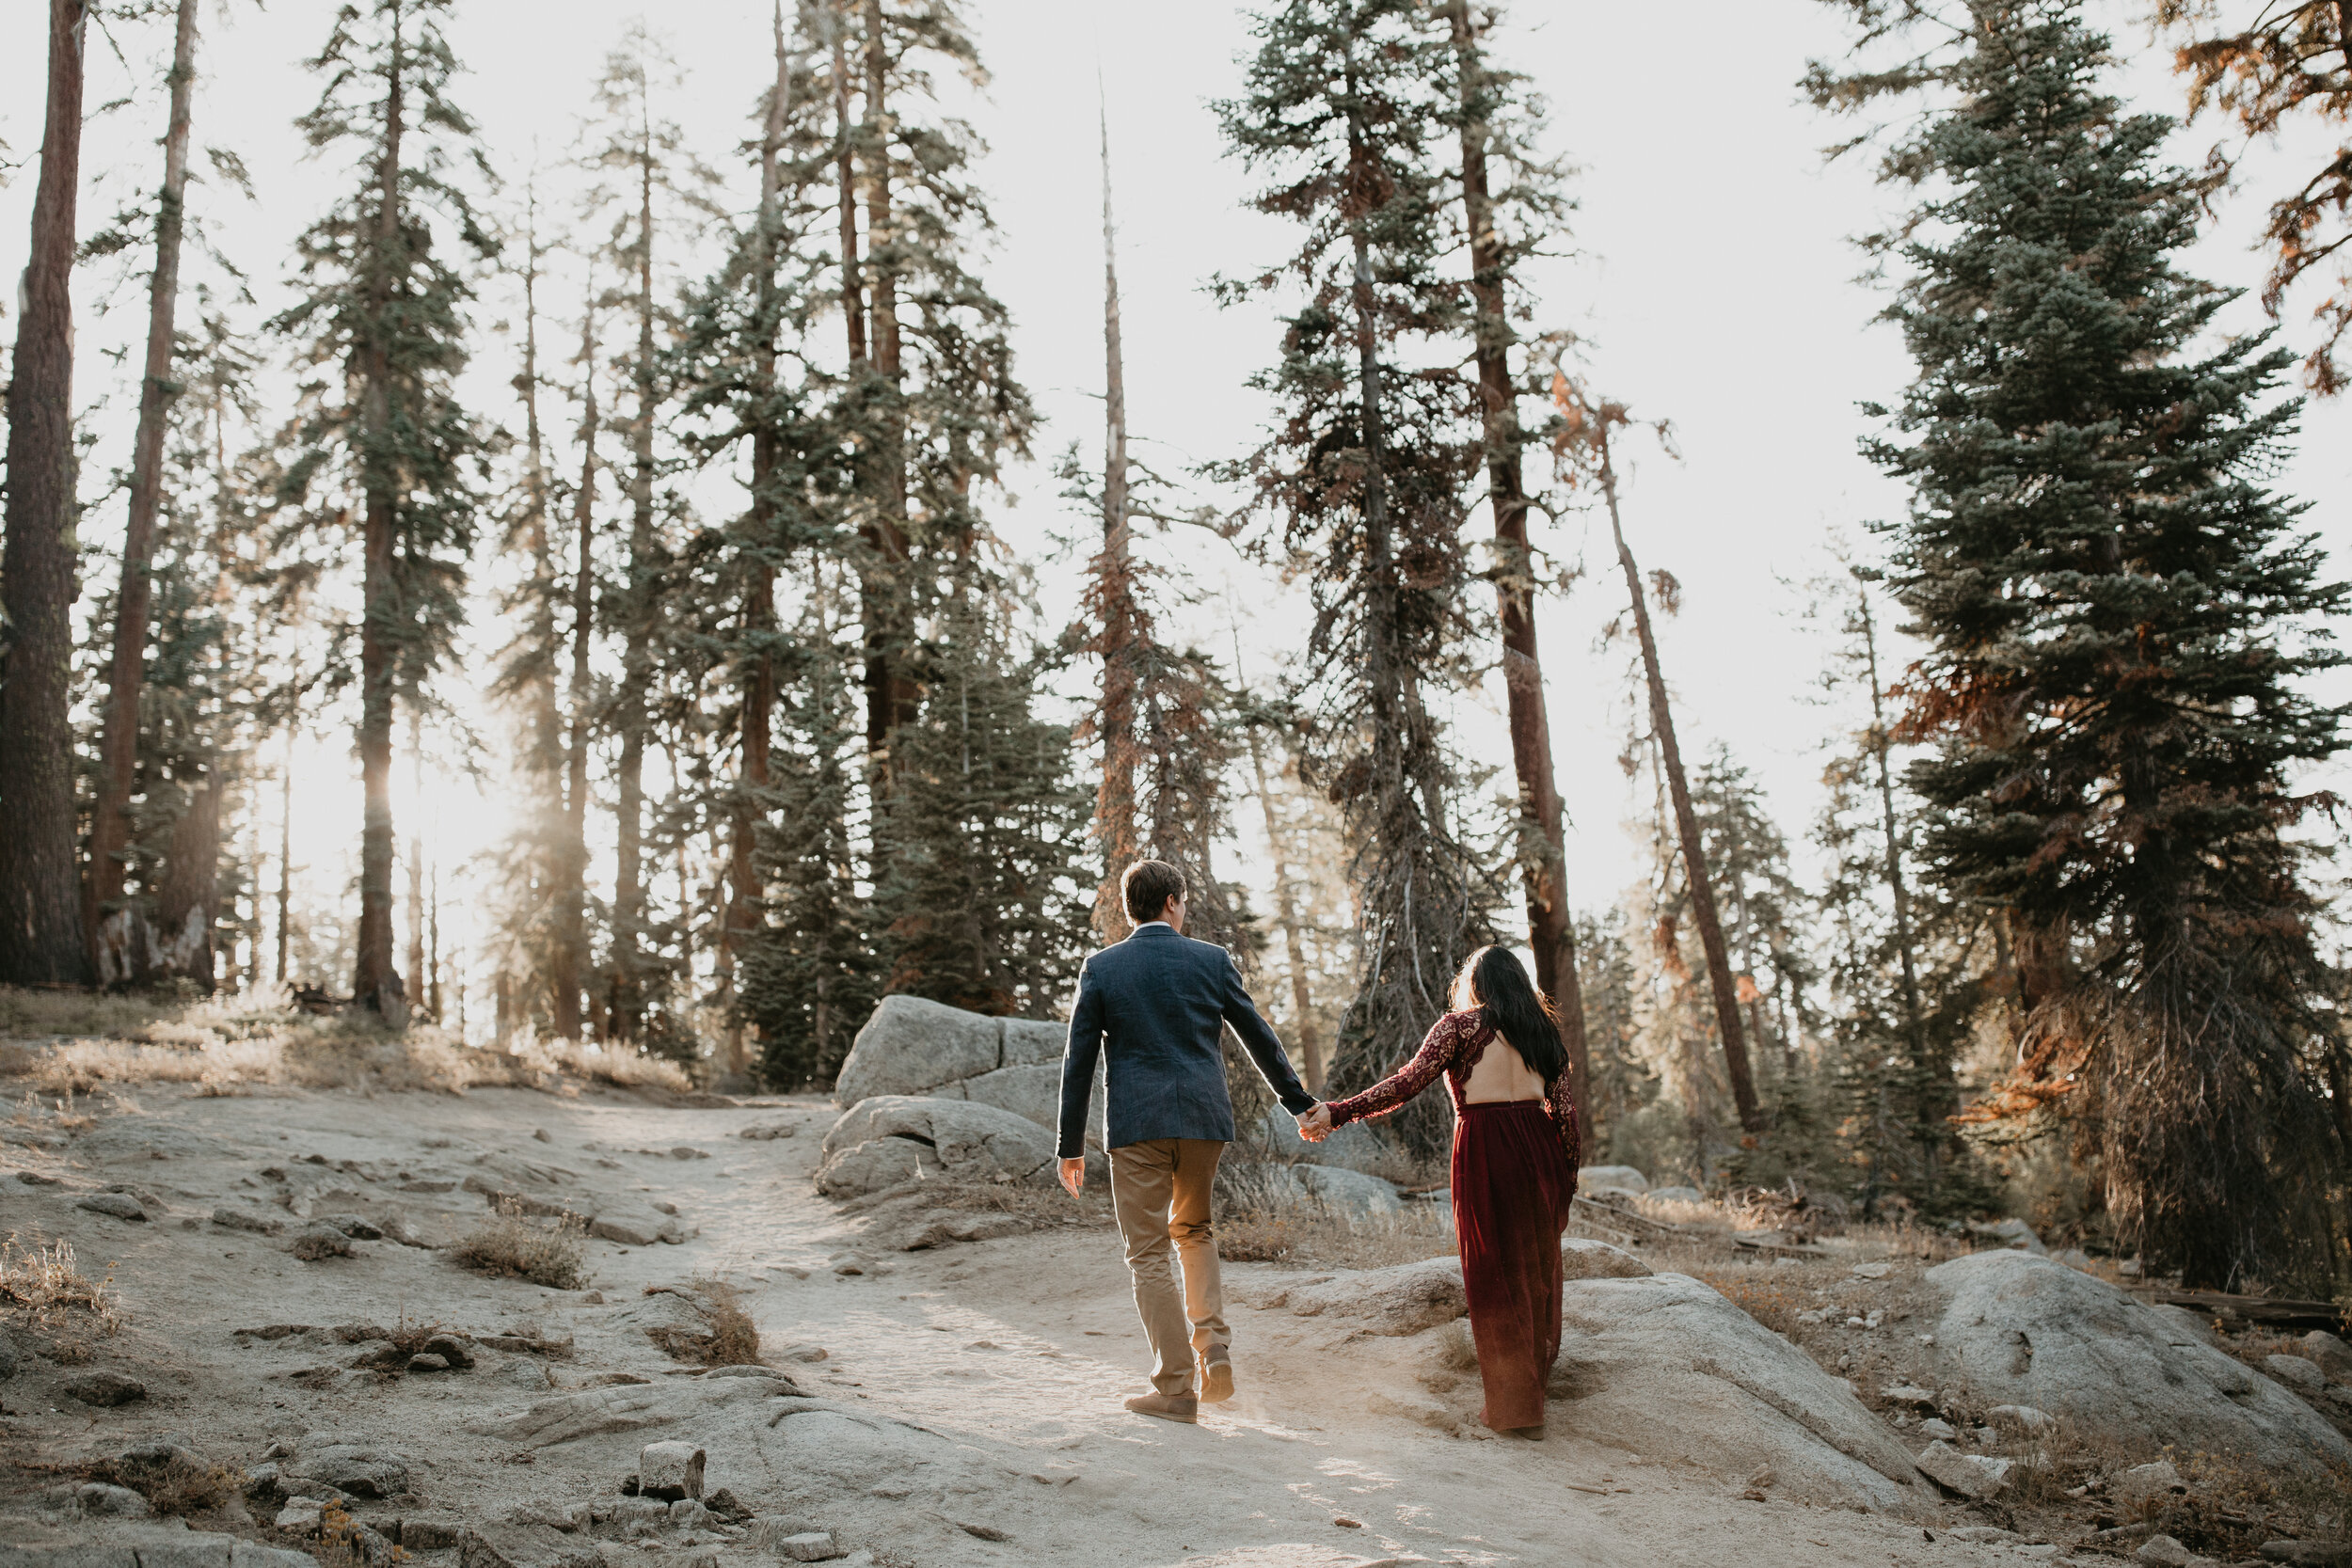 yosemite-national-park-couples-session-at-taft-point-and-yosemite-valley-yosemite-elopement-photographer-nicole-daacke-photography-116.jpg